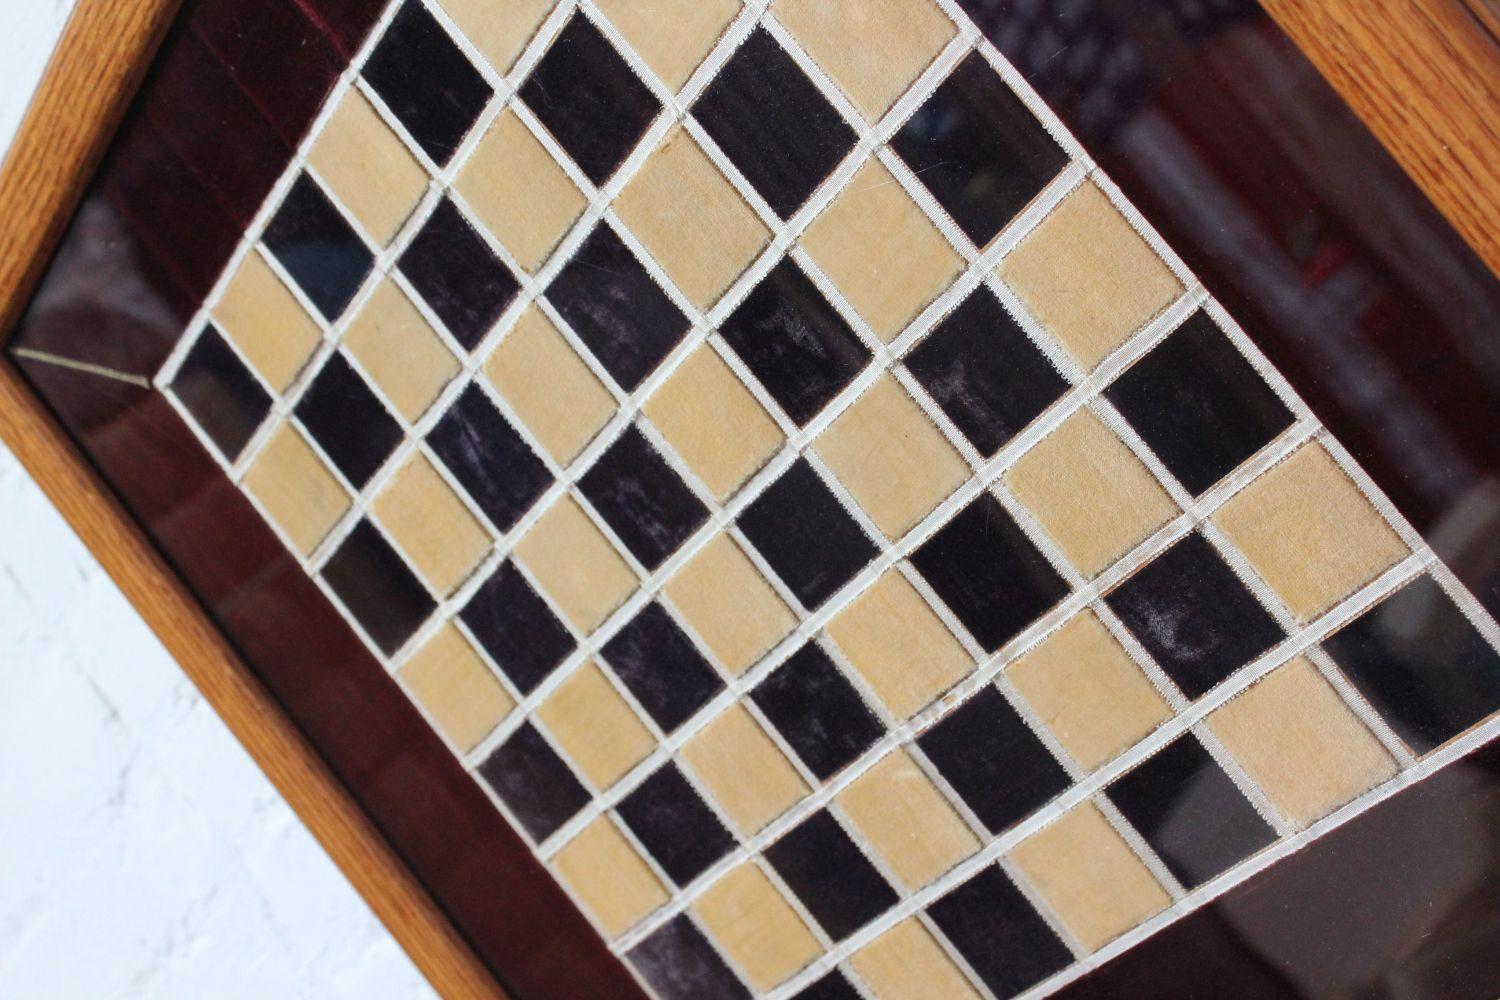 Early Twentieth Century Folk Art Framed Velvet Quilt Chess / Checker Board In Good Condition For Sale In Brooklyn, NY